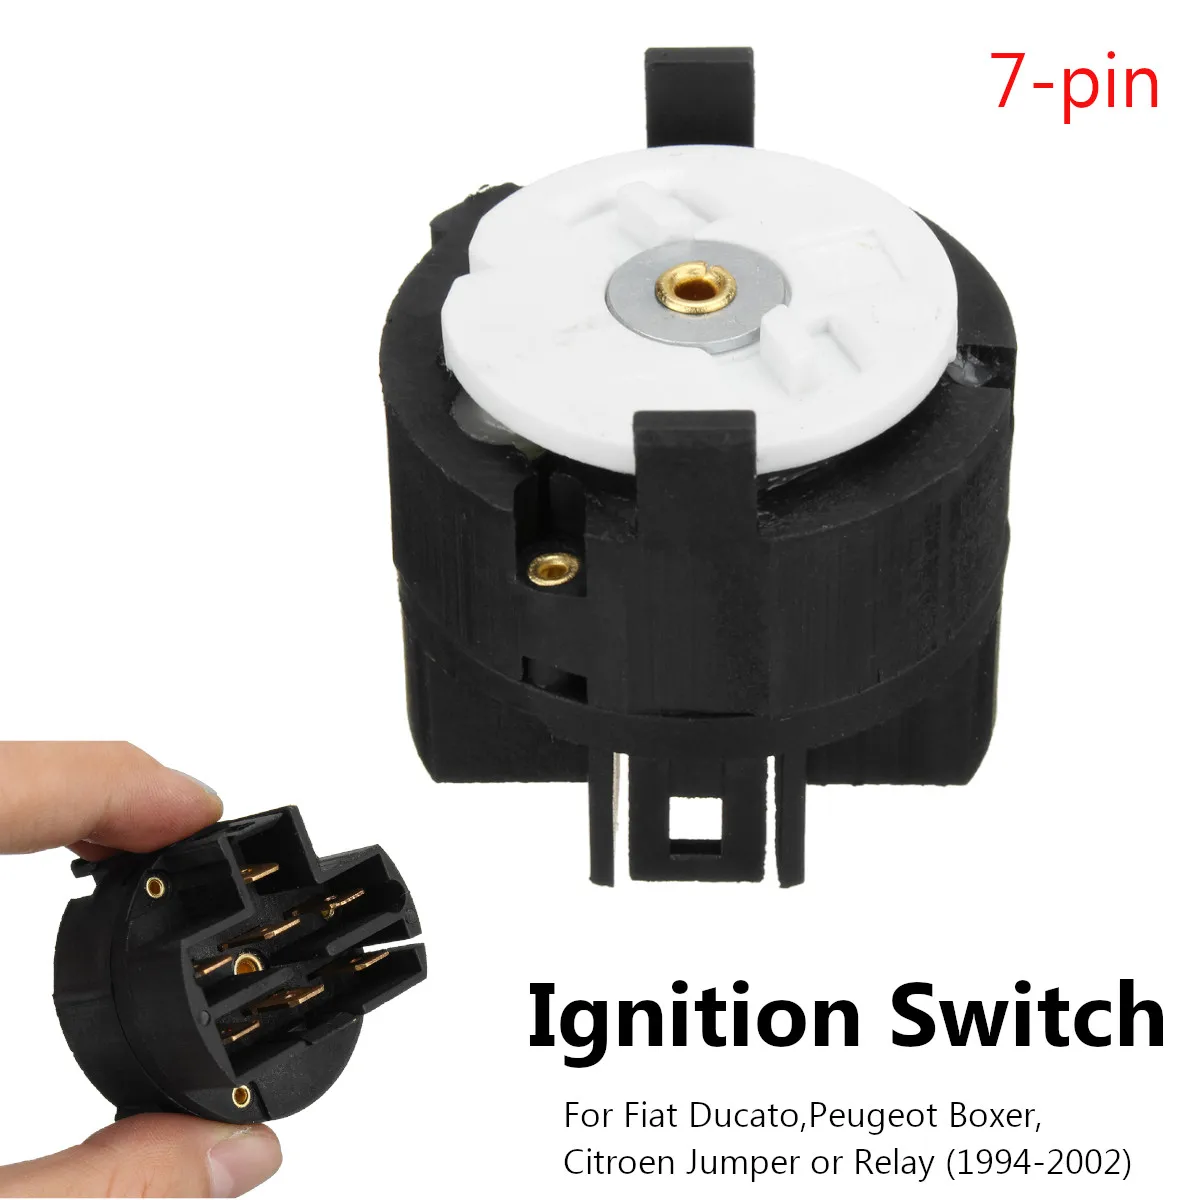 

7 Wide Pin Ignition Starter Switch For Fiat Ducato for Peugeot Boxer for Citroen Jumper or Relay 1994-2002